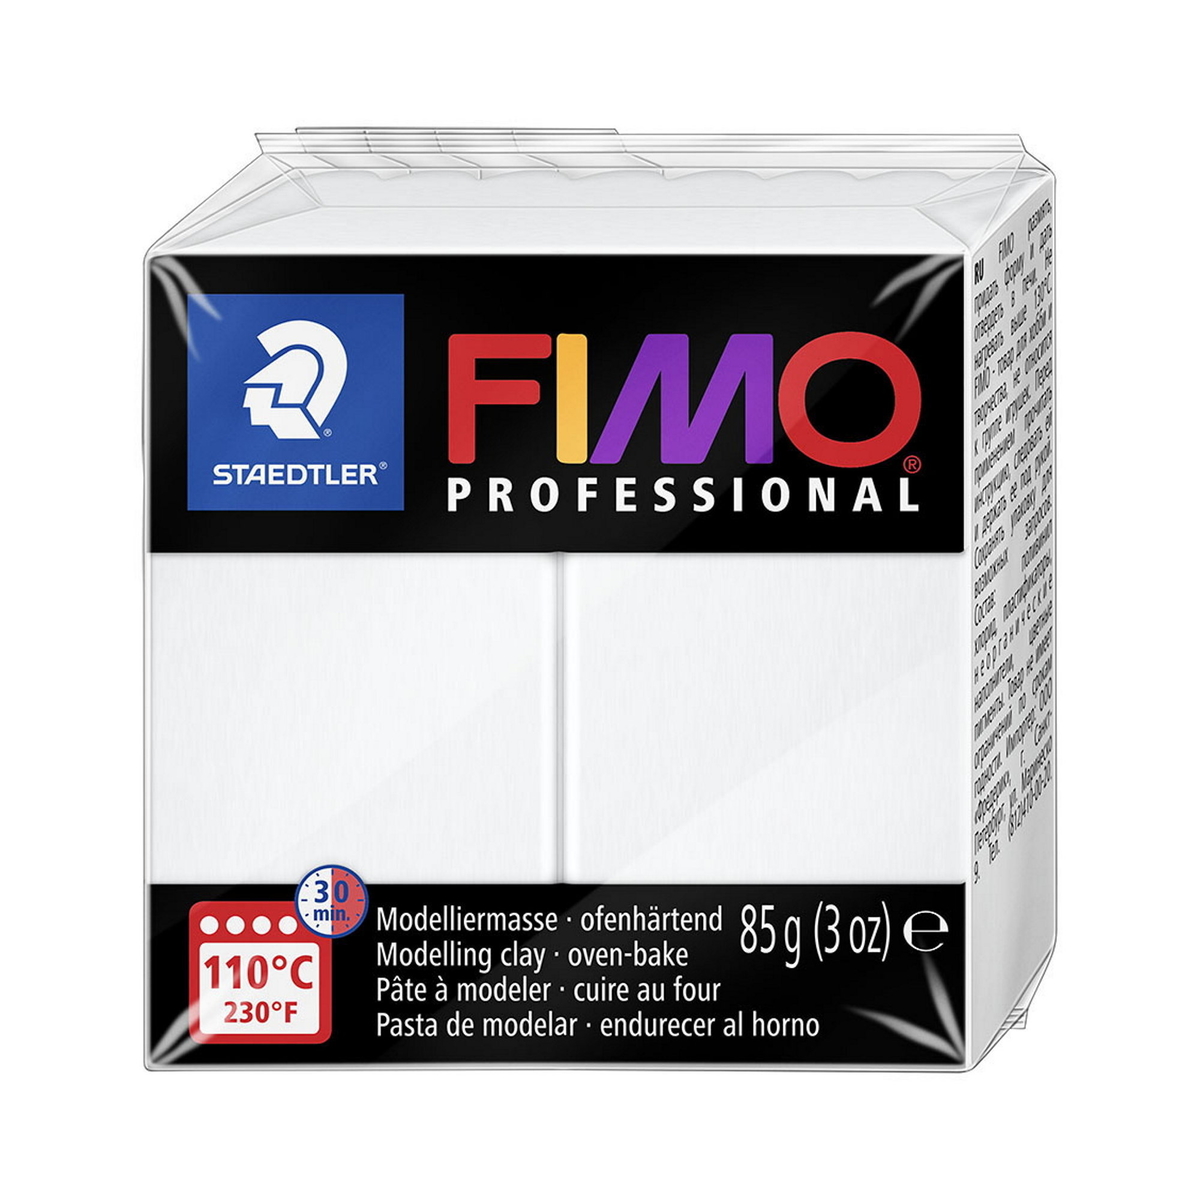 Fimo Professional 85g White 4007817800072 FIMO Staedtler 